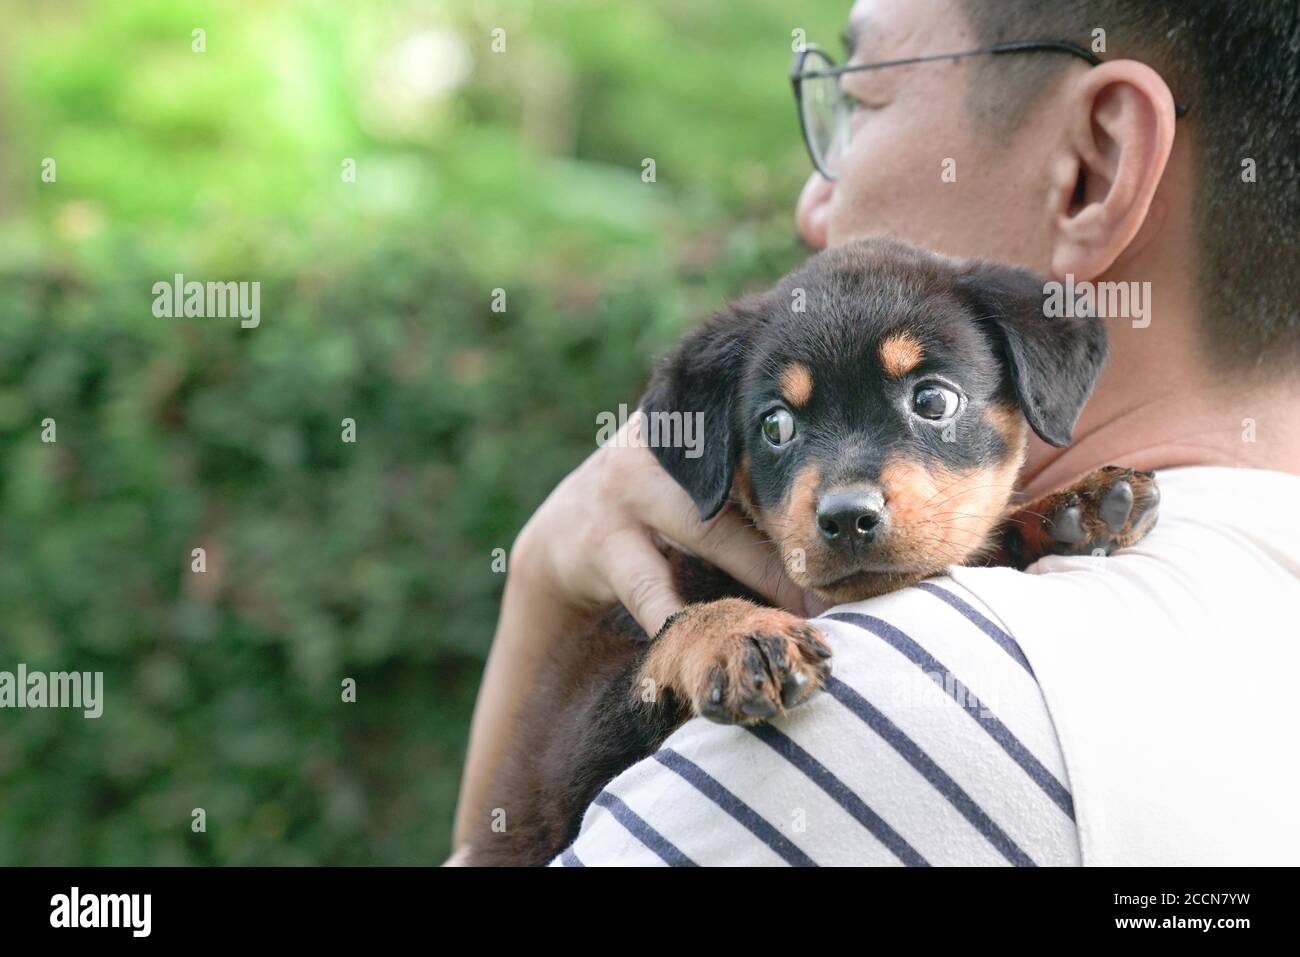 Adult man holding little puppy dog on his shoulder. Copy space. Stock Photo